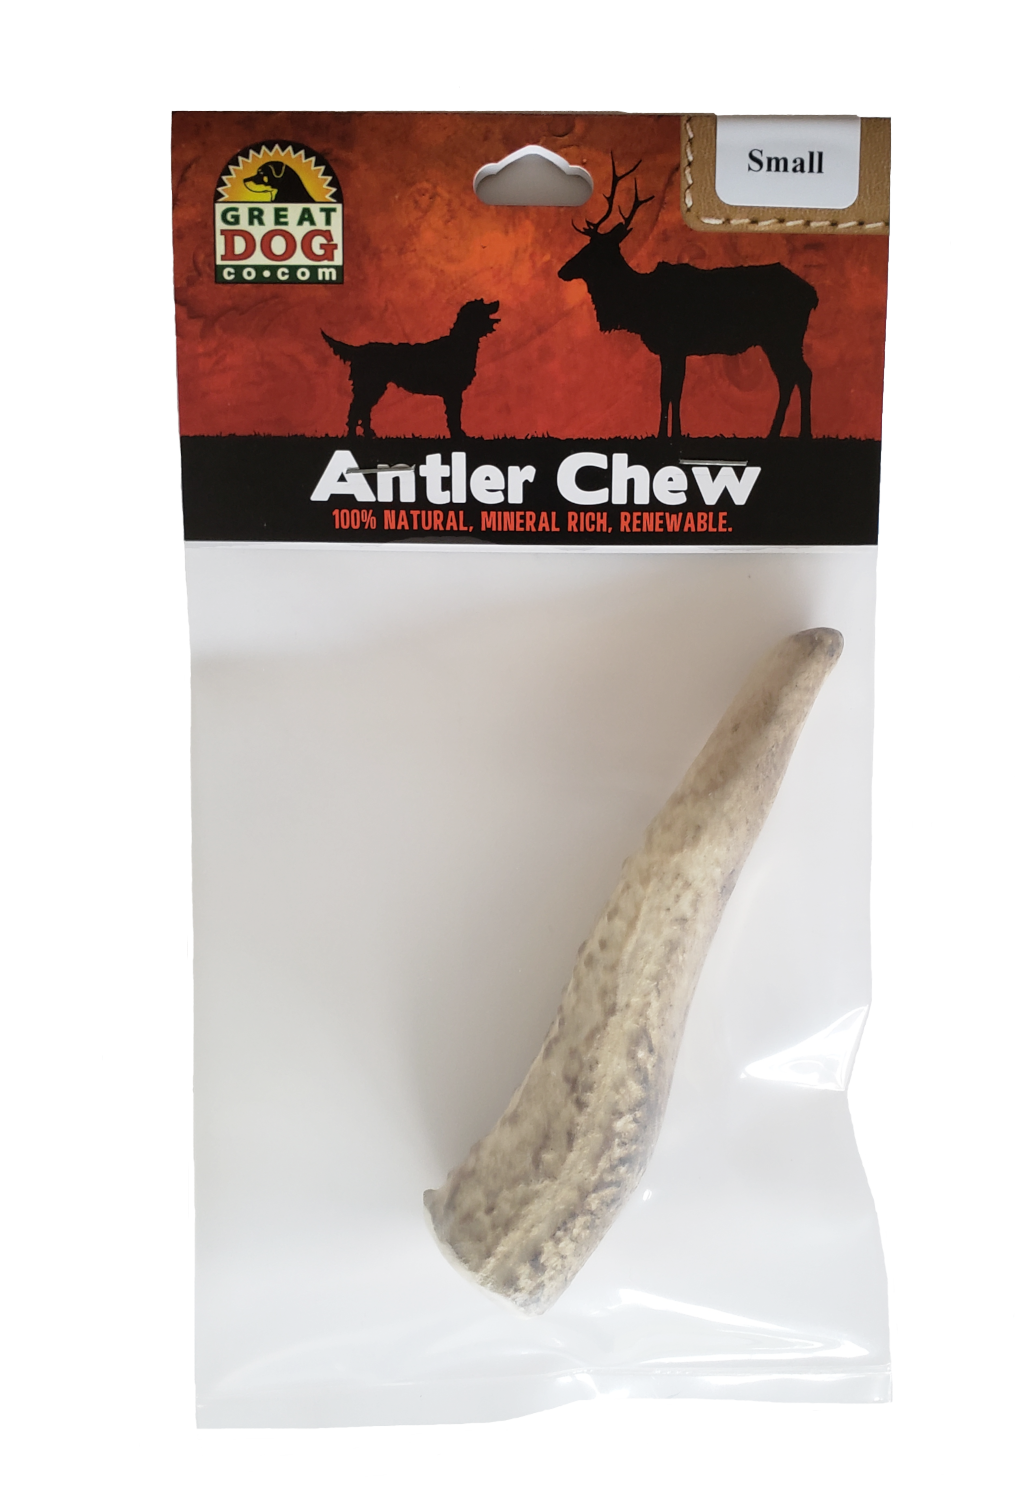 GREAT DOG Small Red Deer Antler Chew - Best for Dogs 8-25 LBS - Sourced and Made in USA